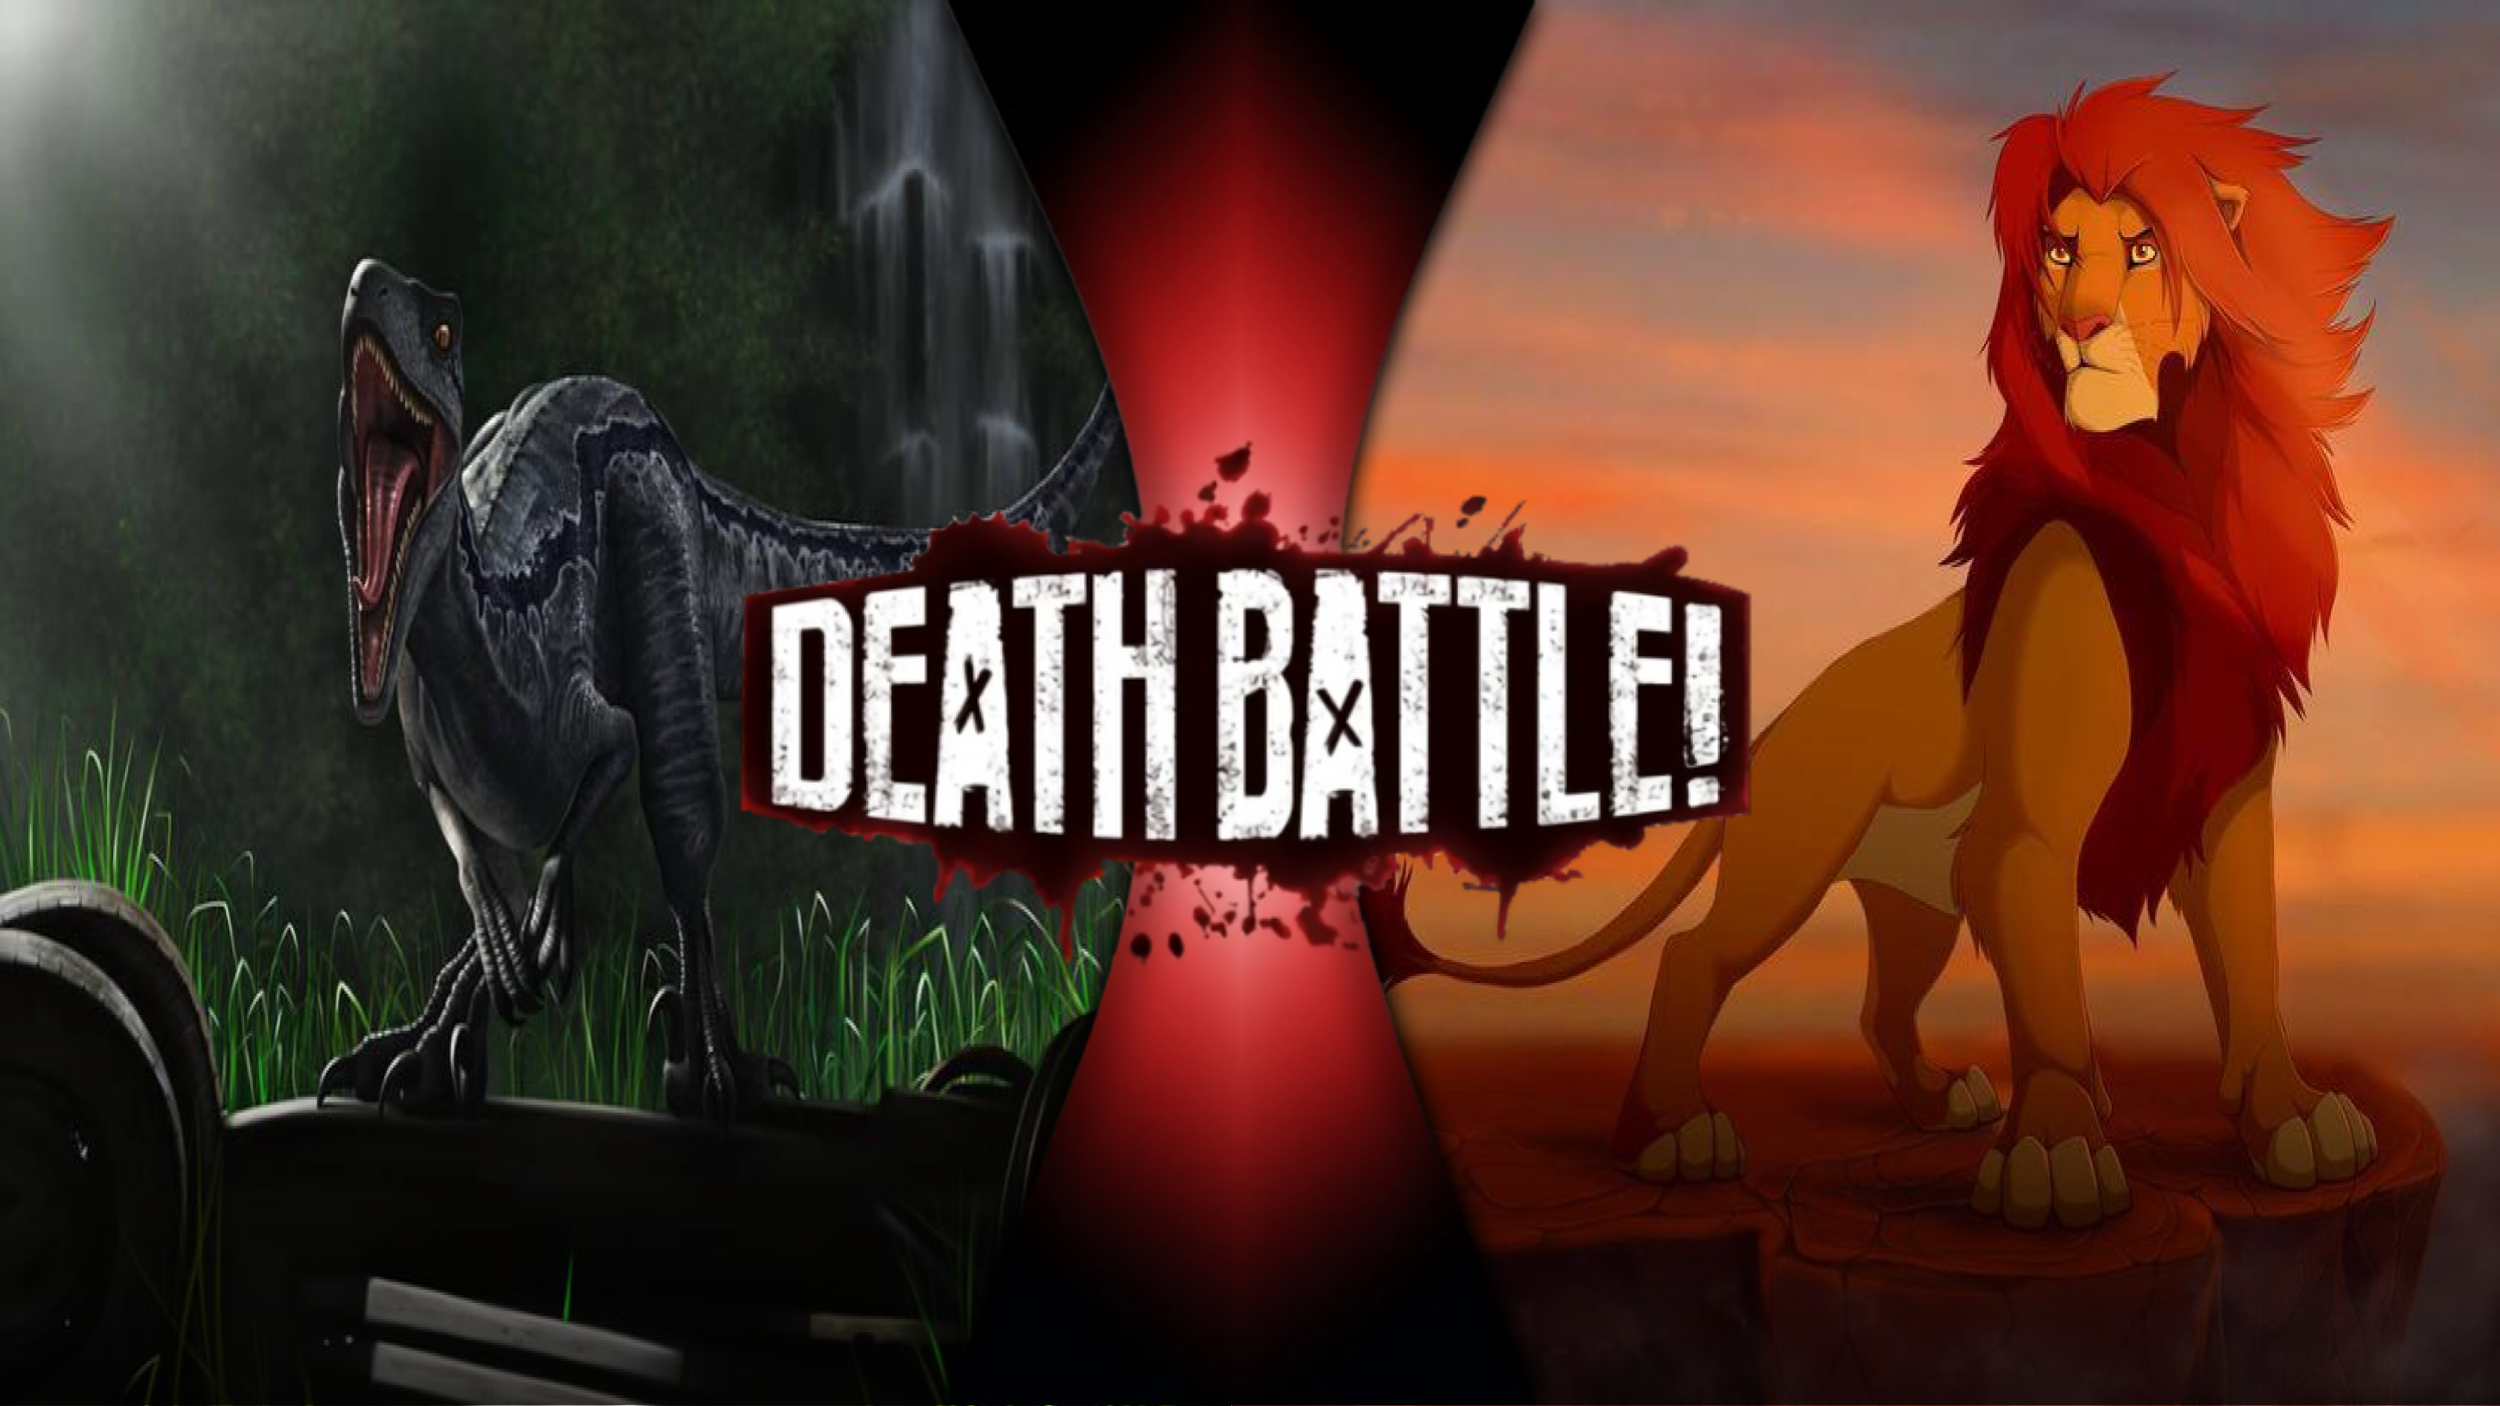 Outrun Certain Death In Chaotic Prehistoric Racing Game Dino Run